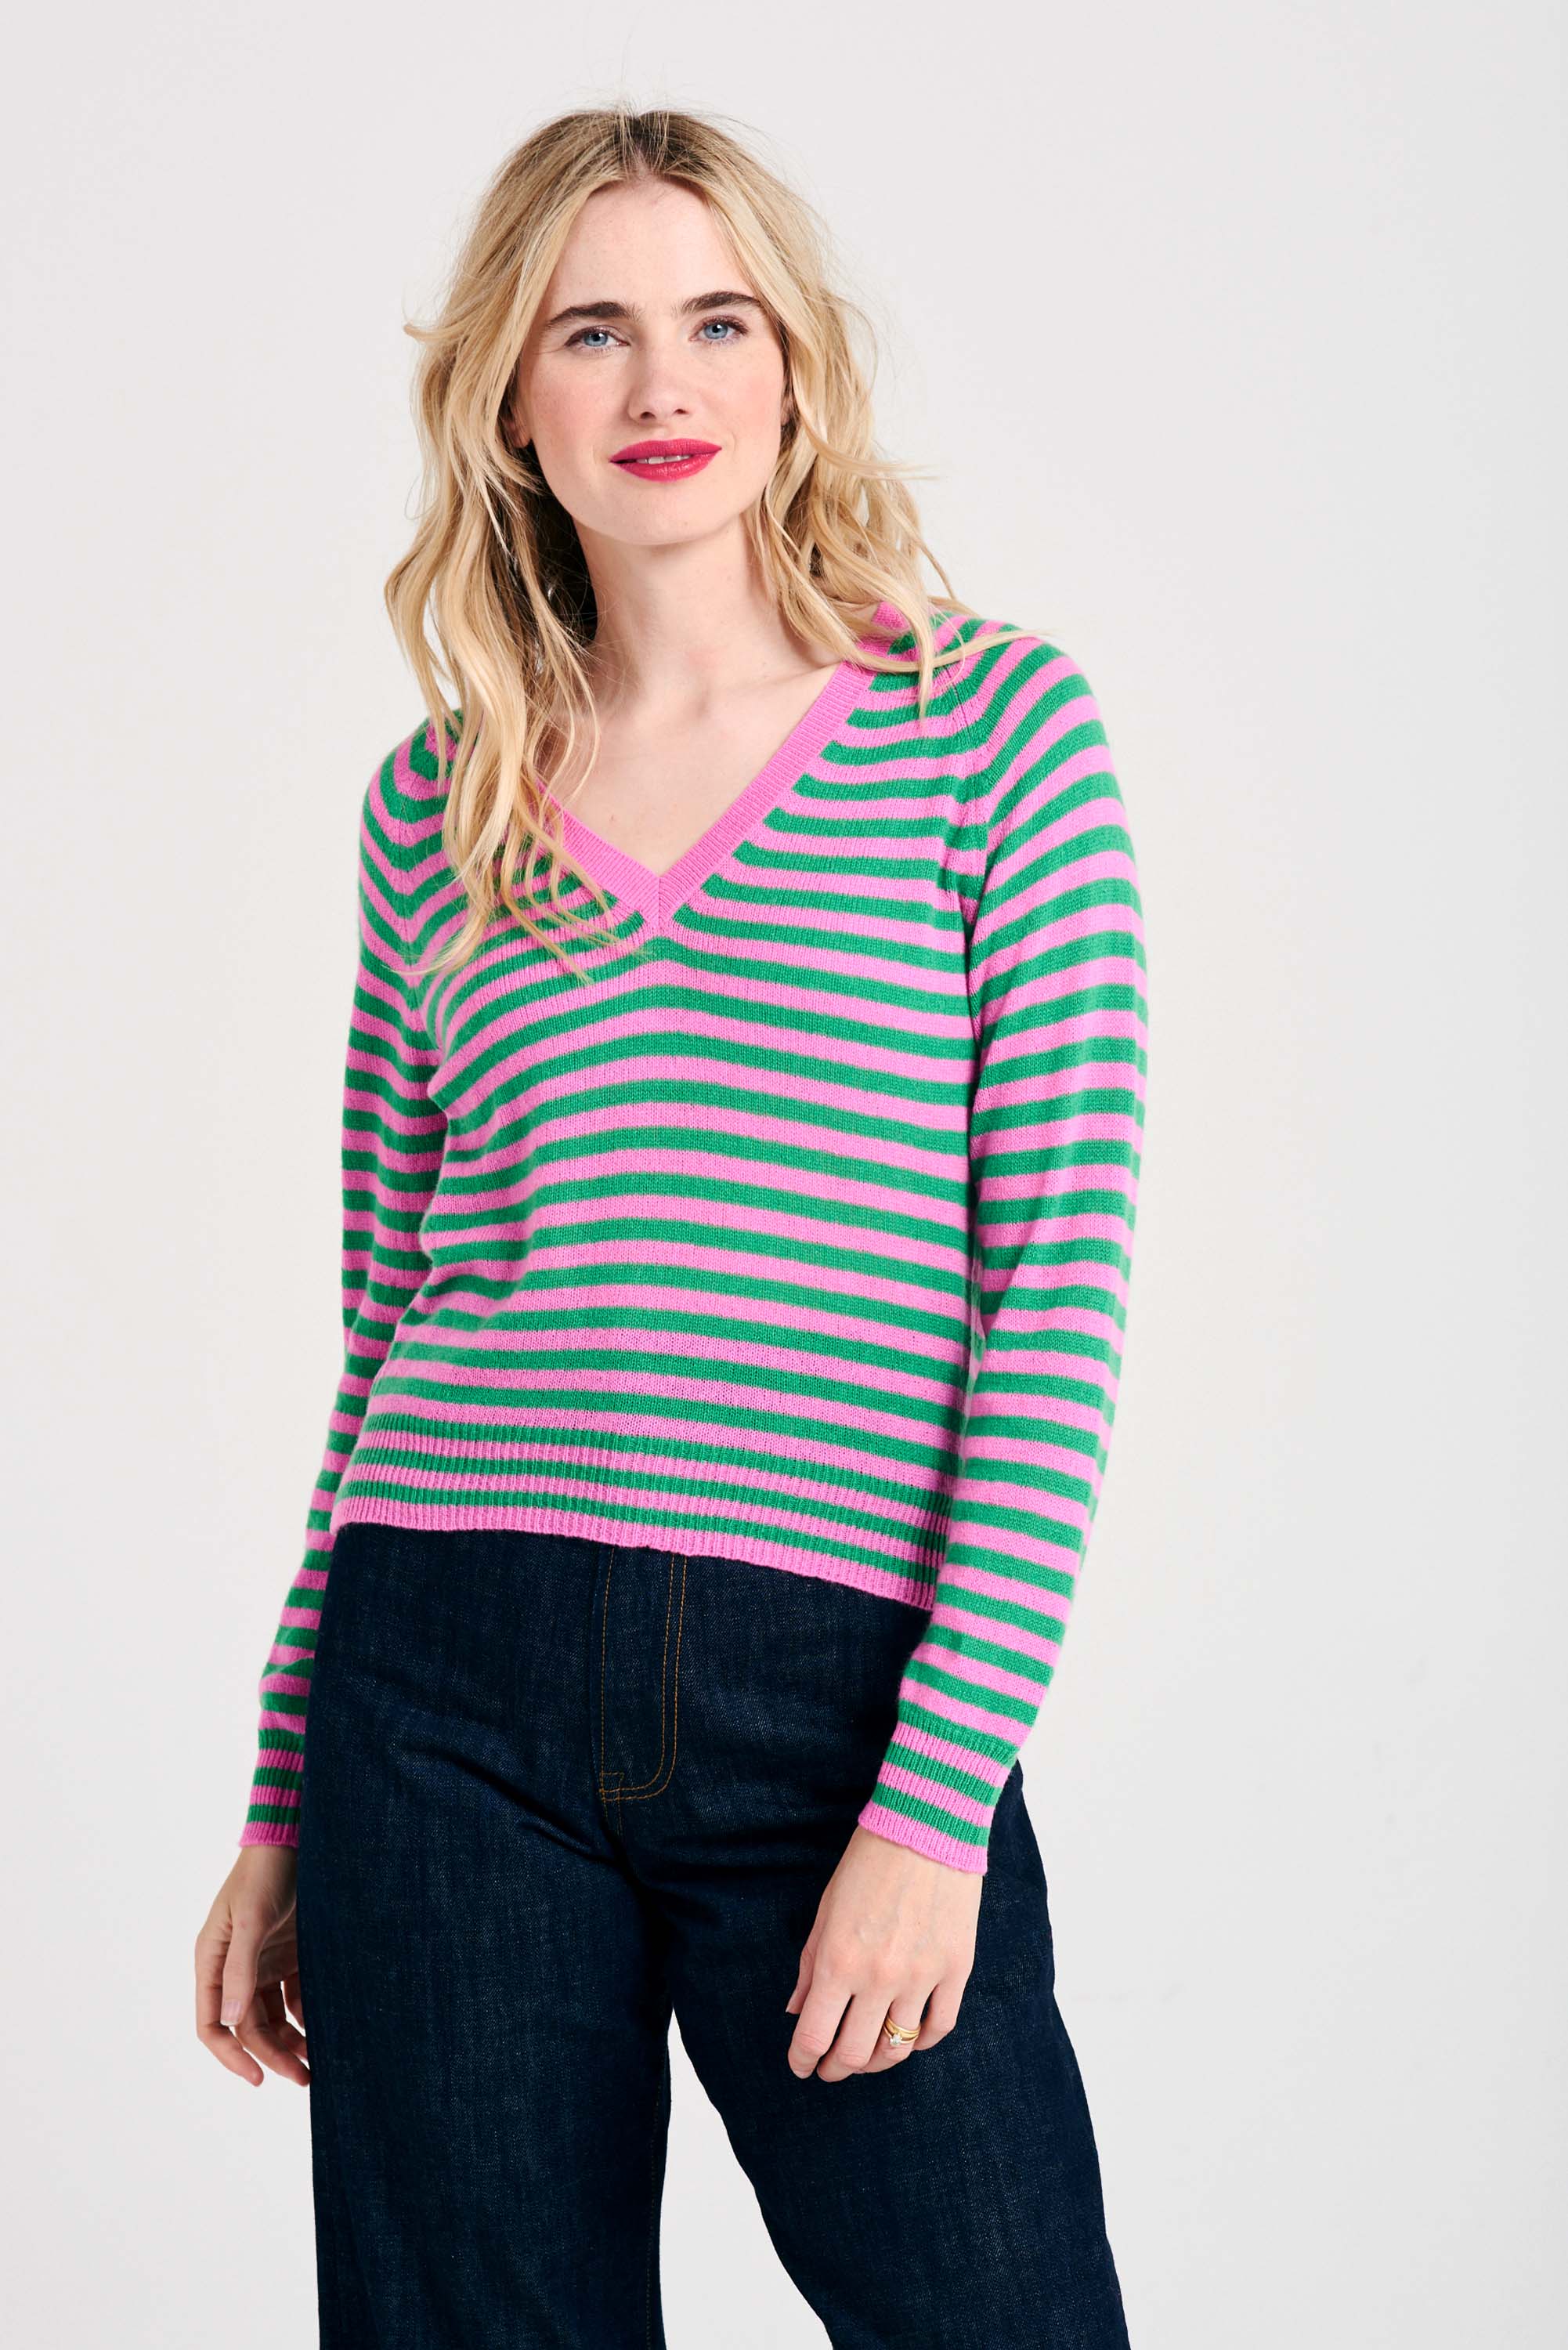 Blonde female model wearing Jumper1234 Peony and bright green narrow stripe lighter weight vee neck cashmere jumper